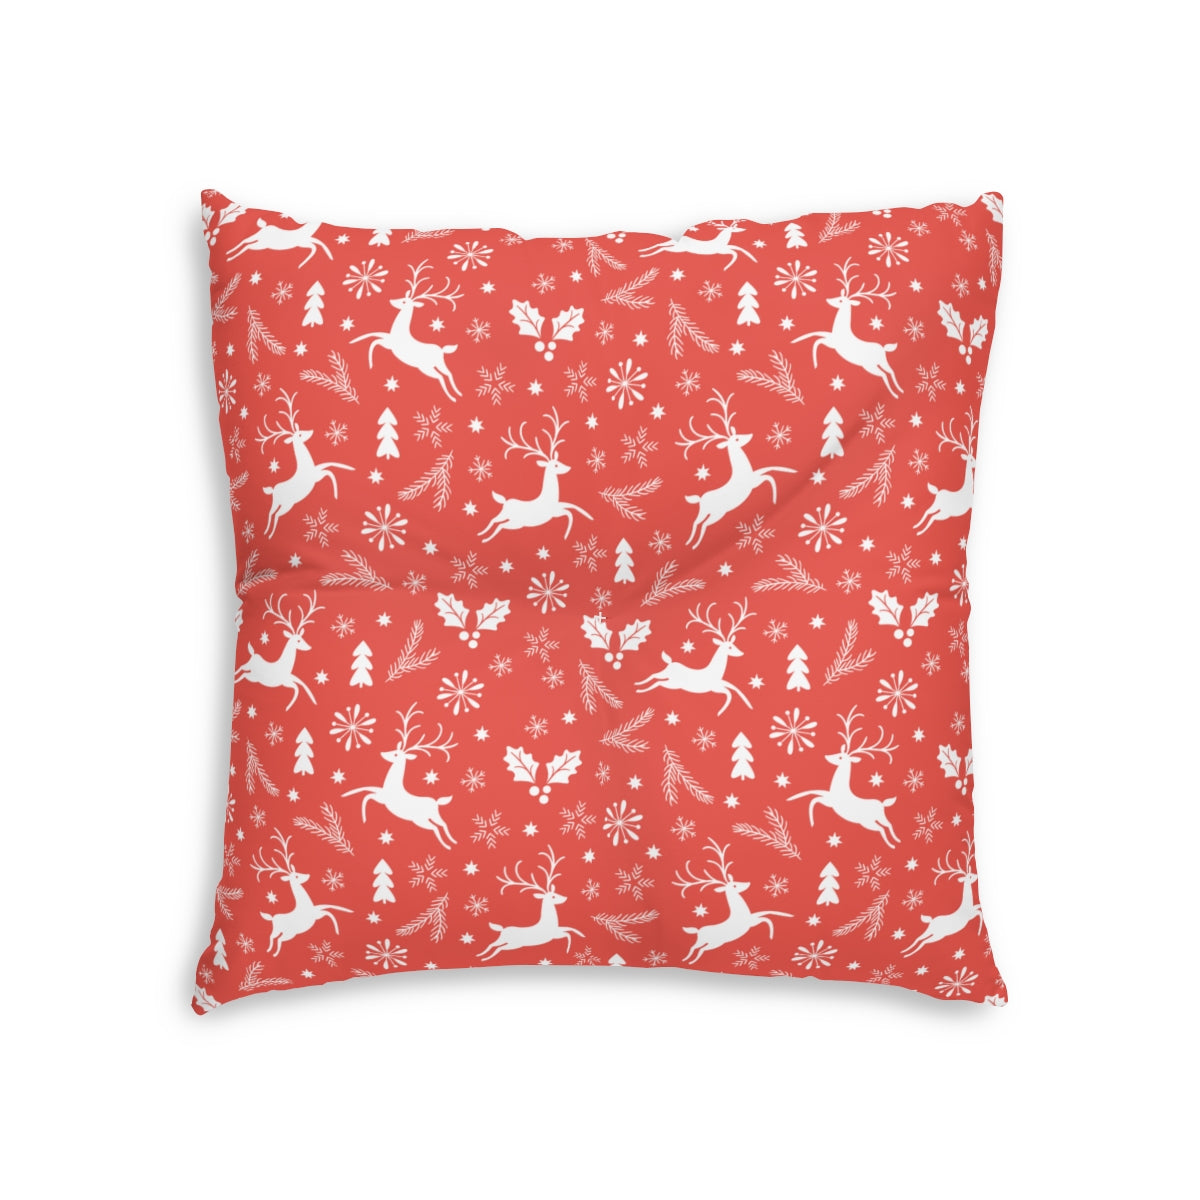 Christmas Reindeers Tufted Floor Pillow, Square